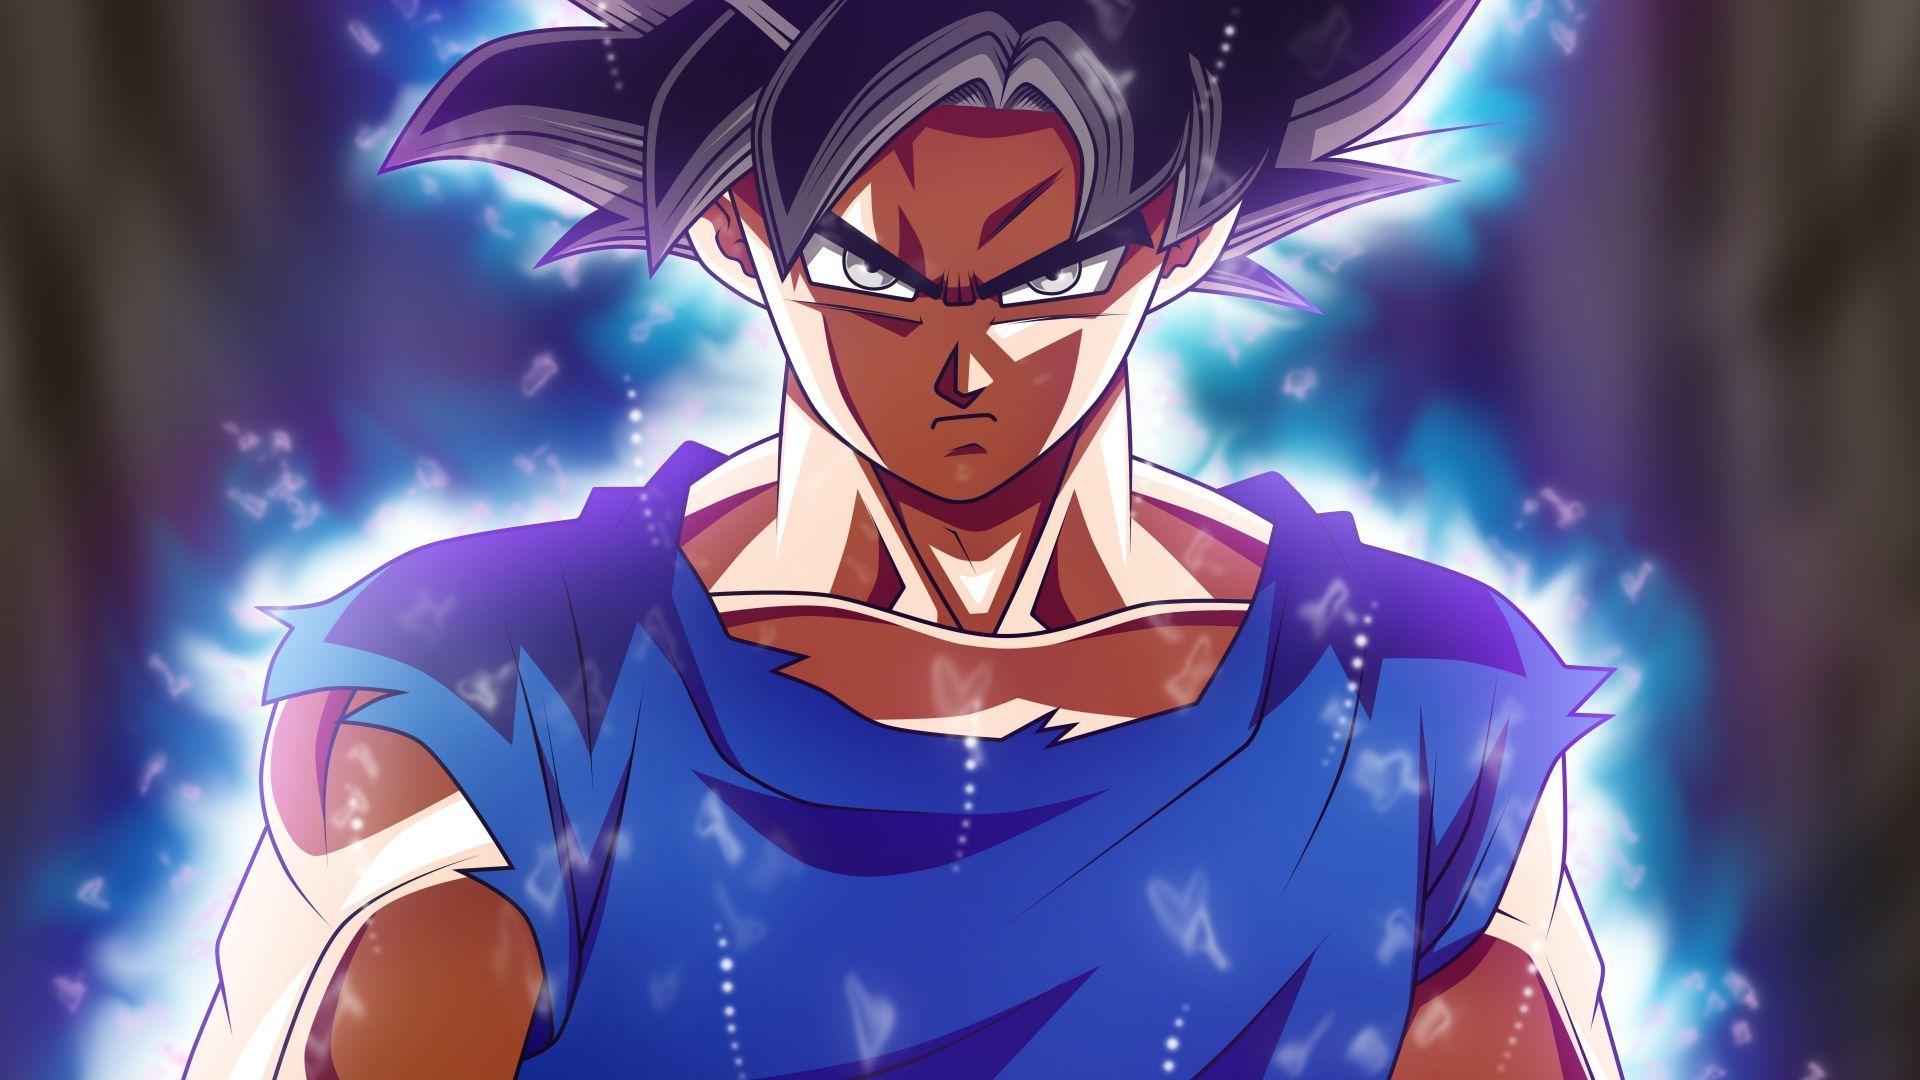 Desktop Wallpaper Angry, Super Goku, Dragon Ball Z, 5k, HD Image, Picture, Background, 24cae9